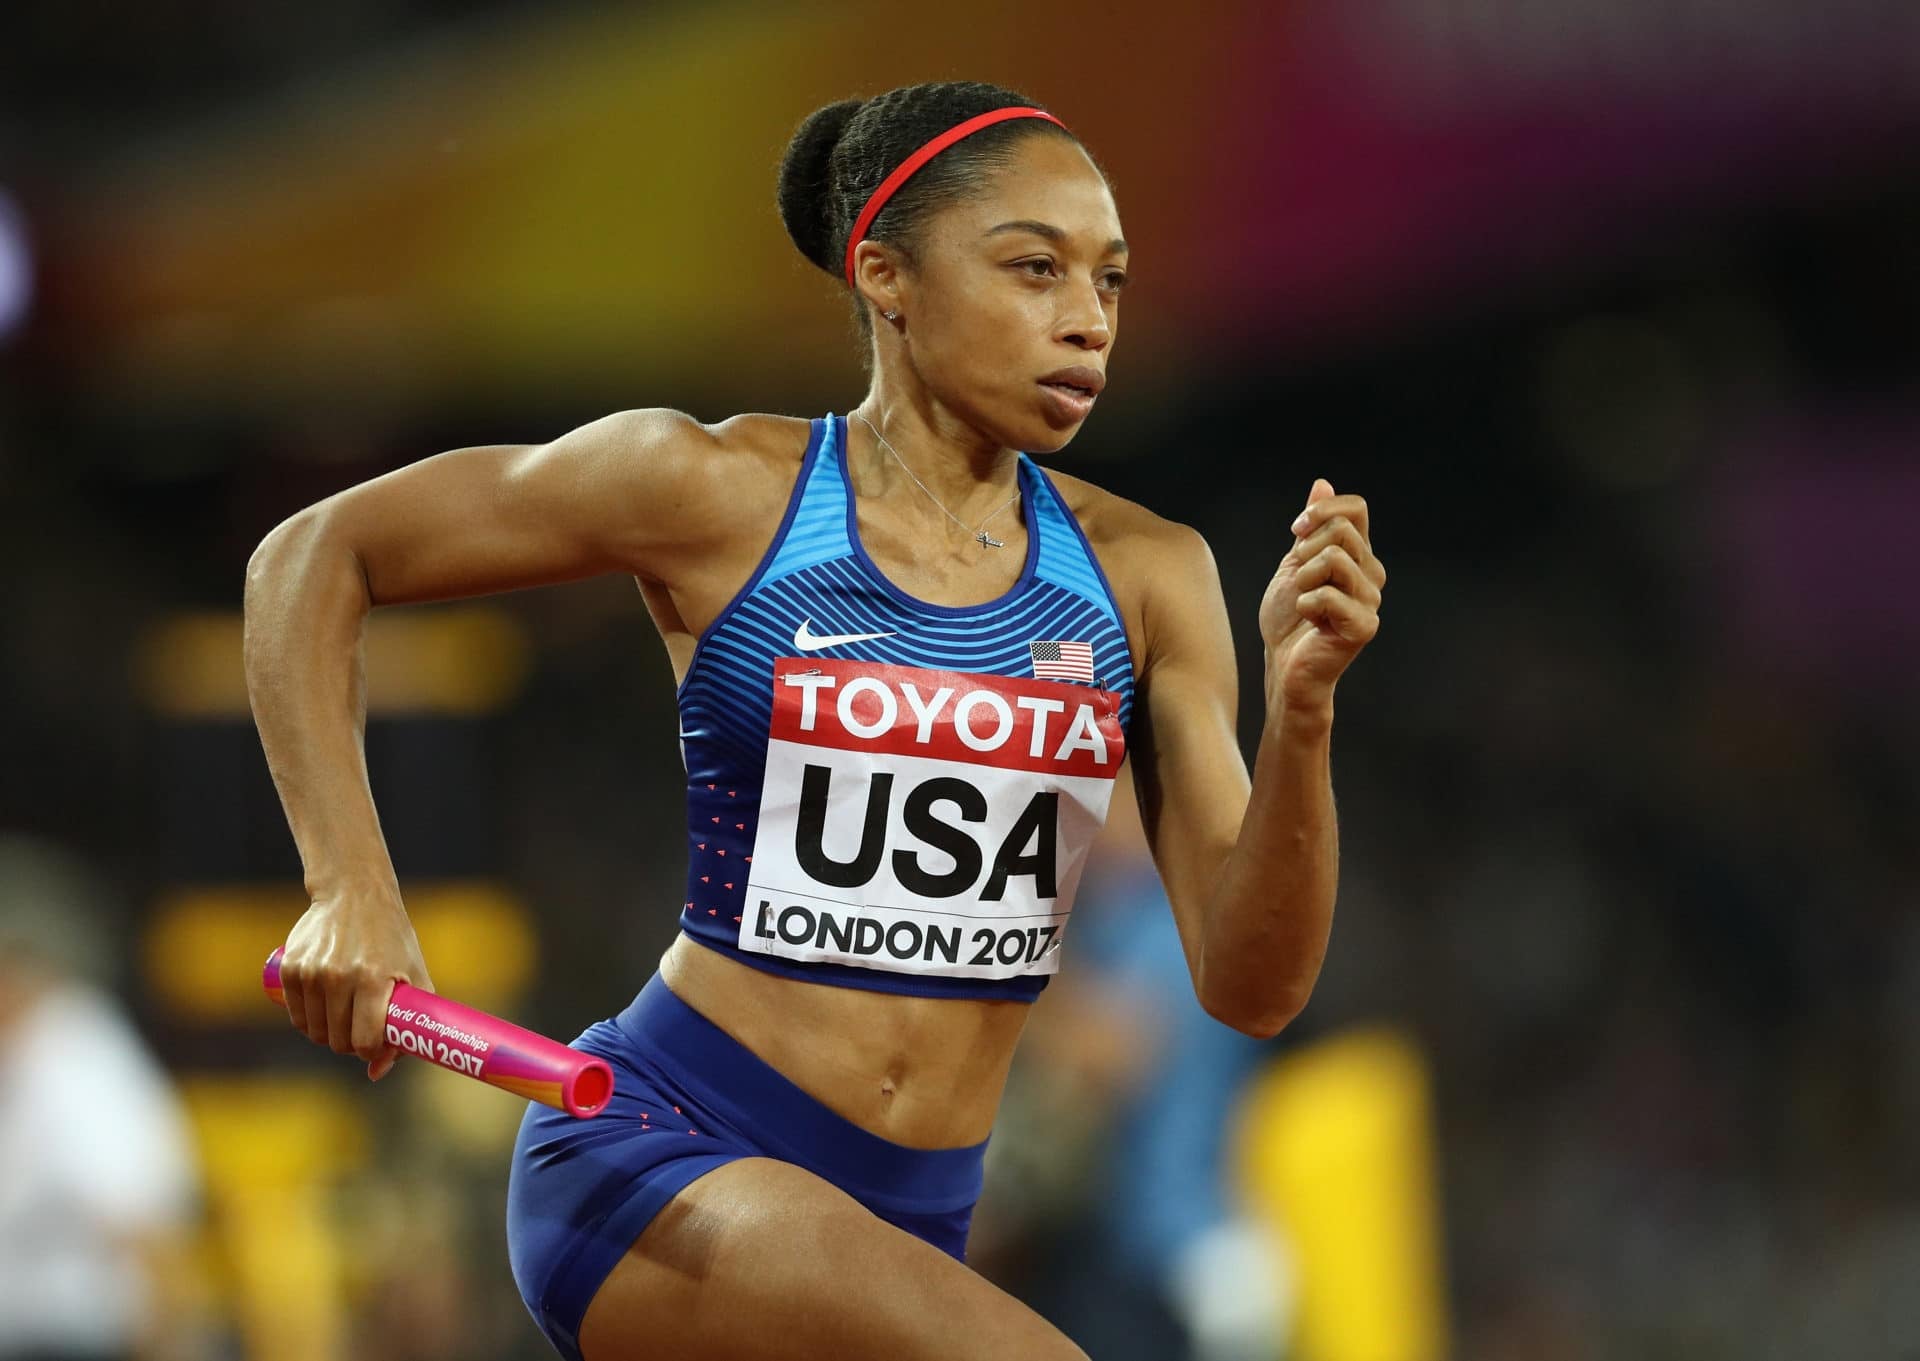 Olympic Champion Allyson Felix Welcomes A Baby Girl And Opens Up About Her Daughter Being Premature